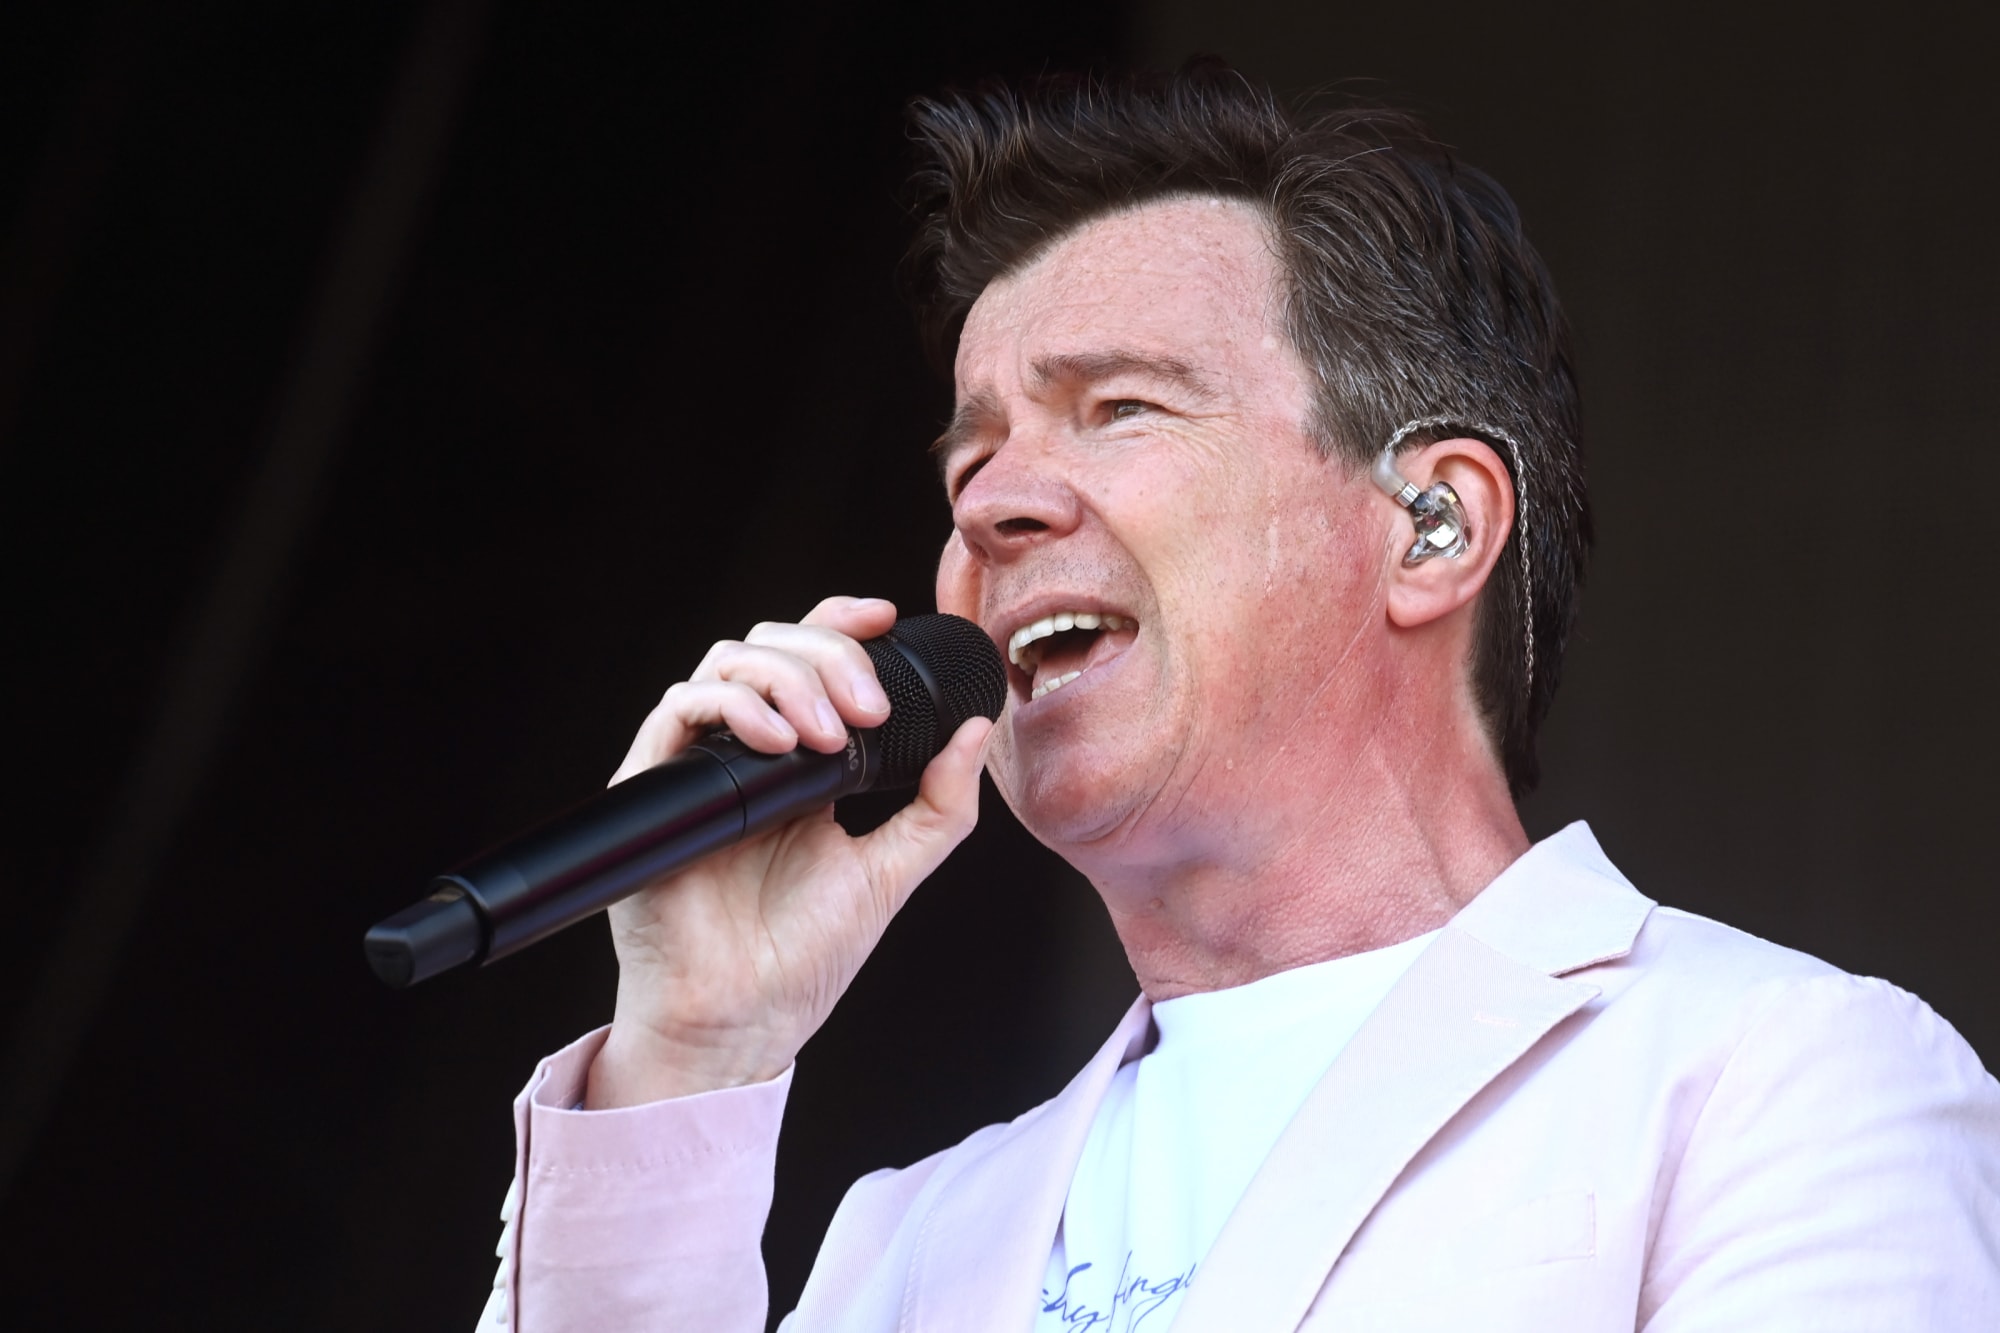 Rick Astley and Frito-Lay spin a new tune for the new year, interview